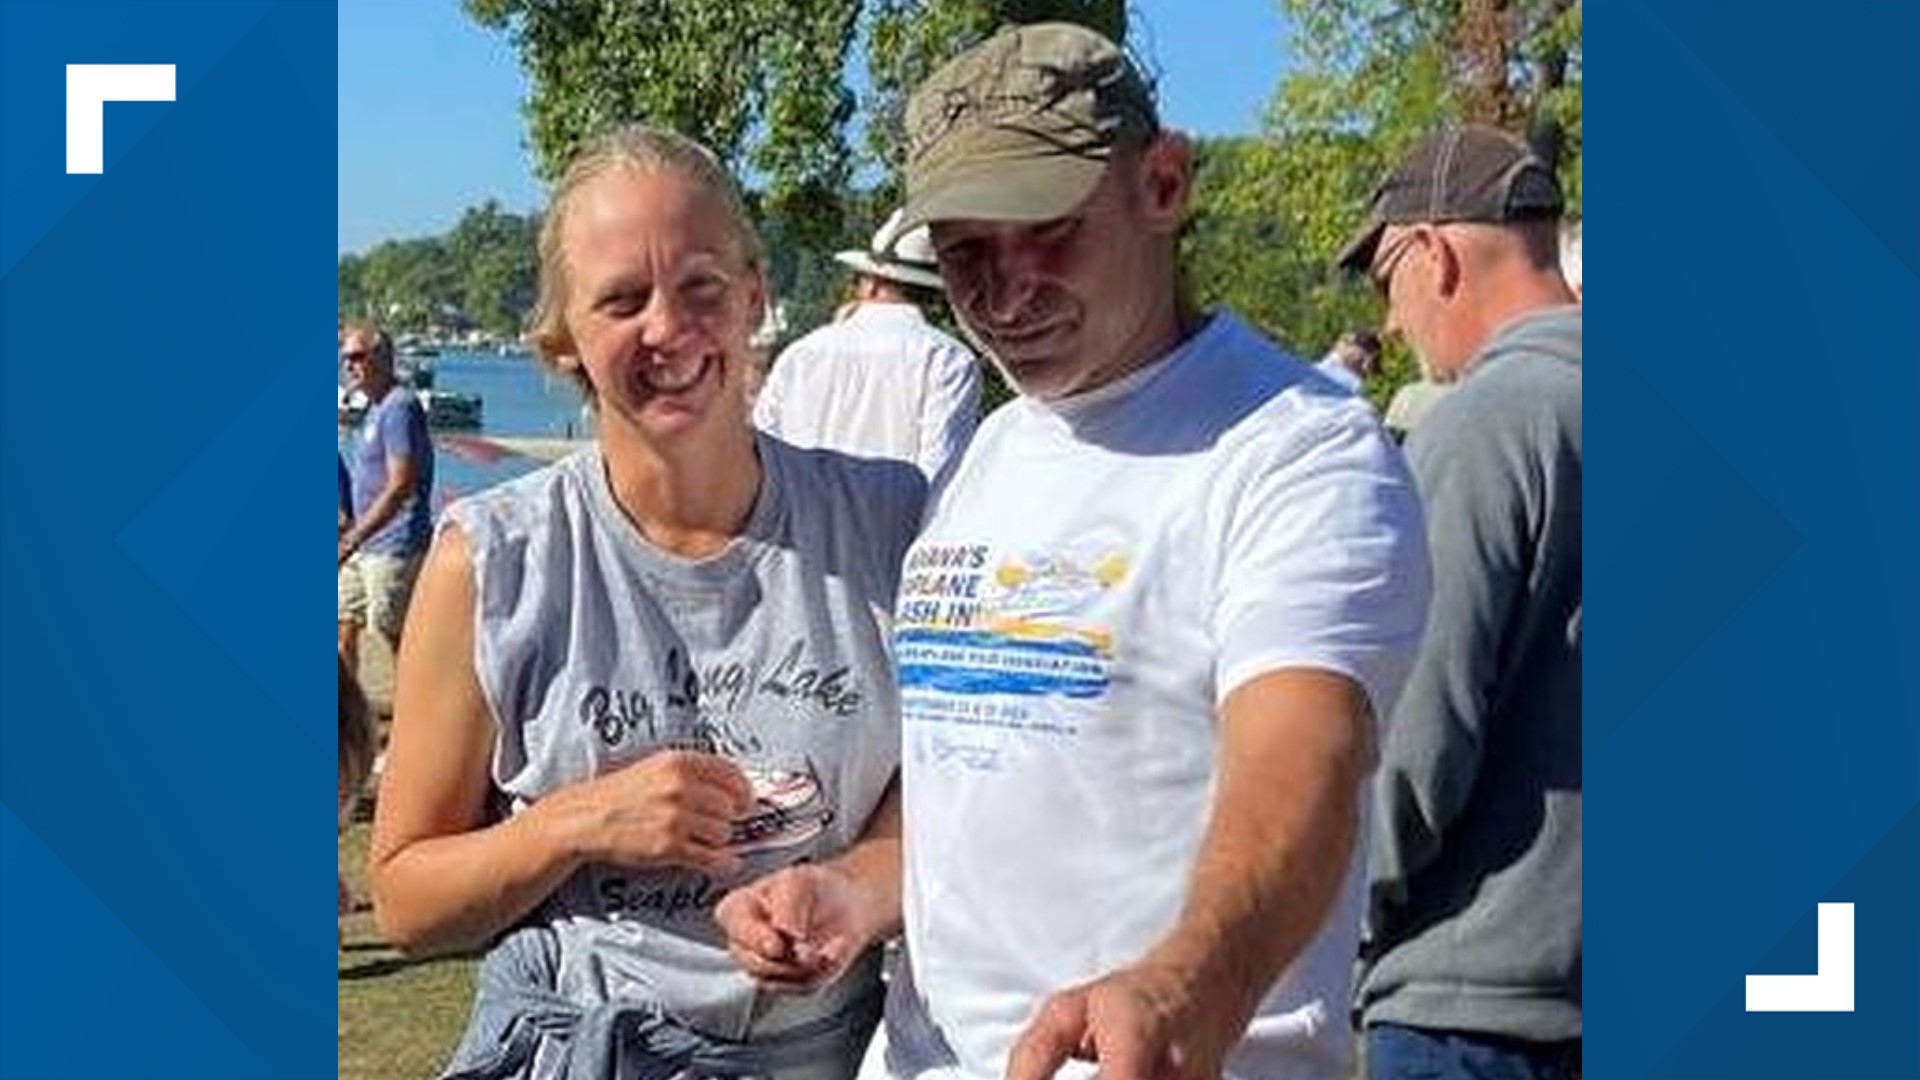 Randy Strebig, 60, and Allison Wheaton, 43, had been together for 17 years and got married last year in a surprise ceremony at their seaplane event in Indiana.